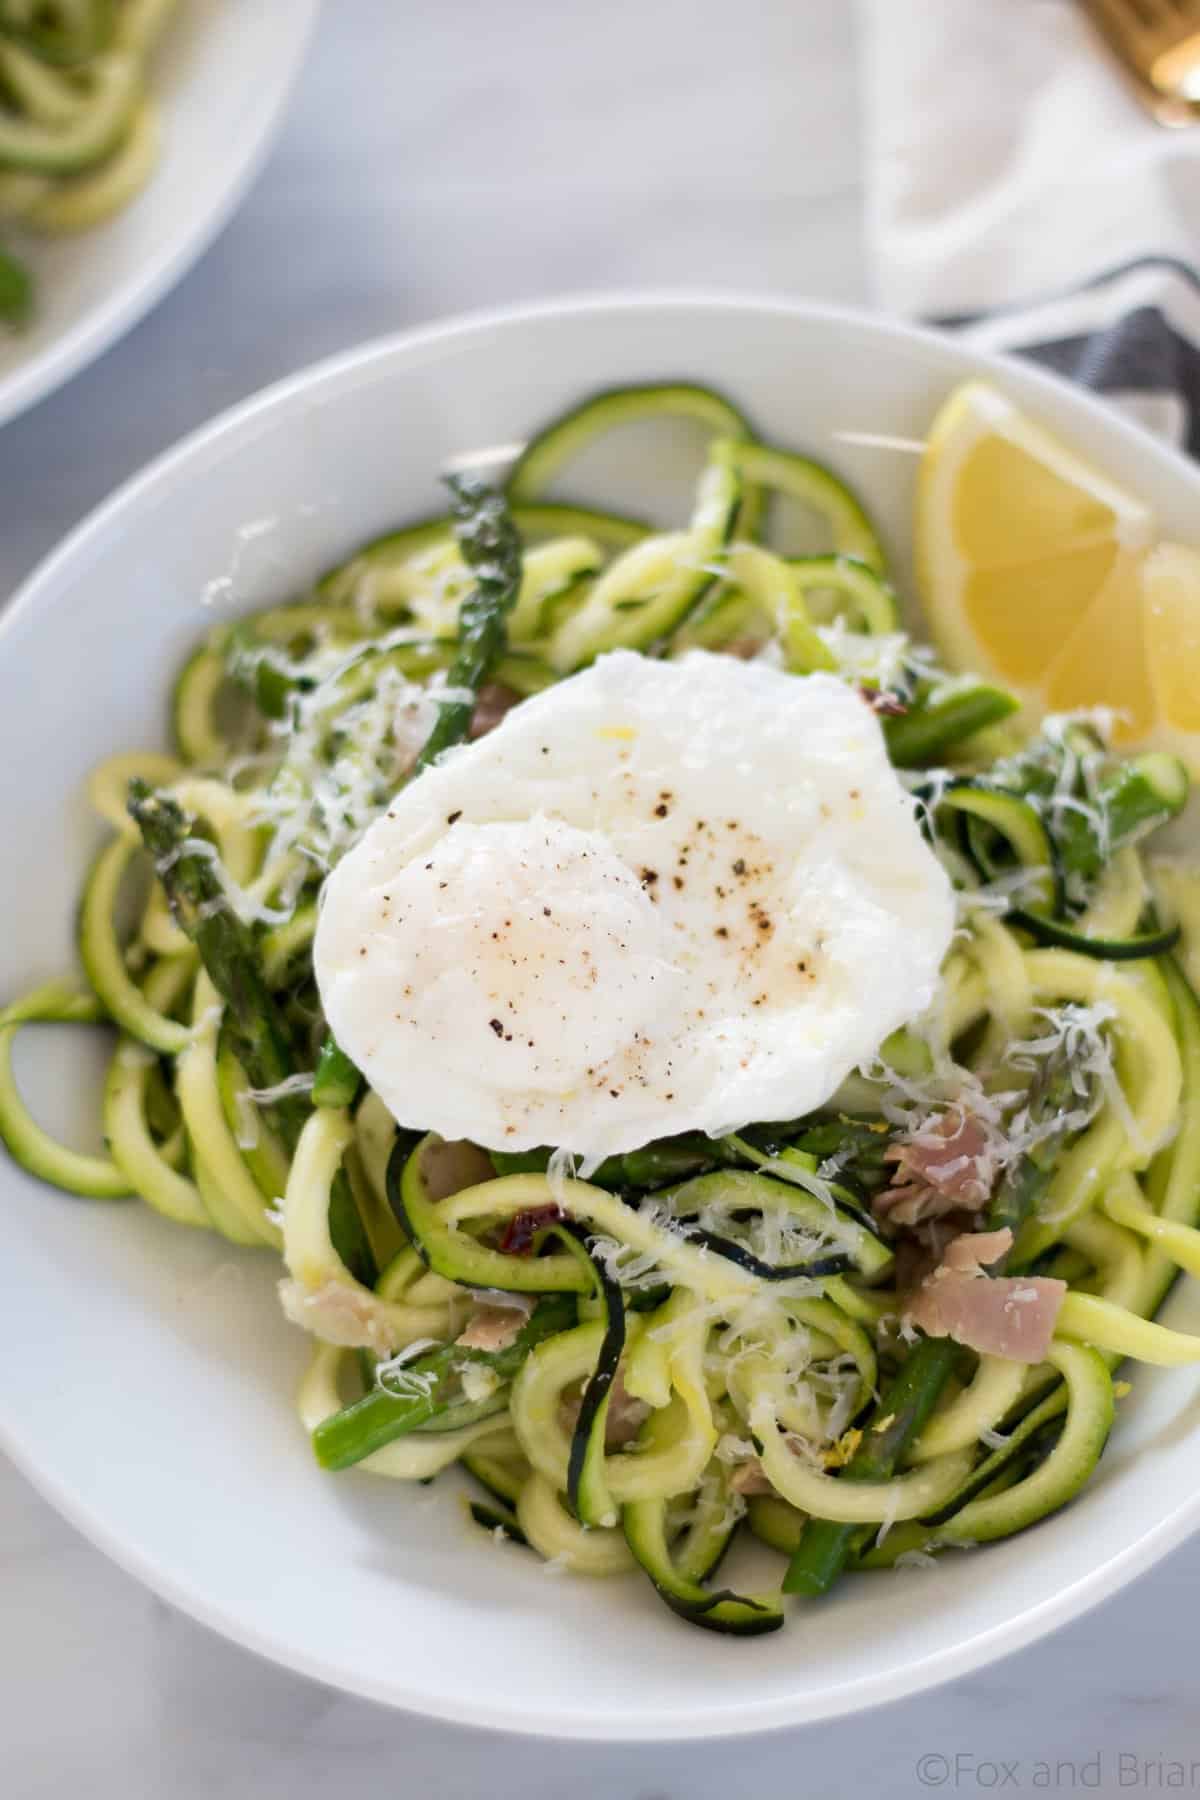 Zoodles (zuchinni noodles) quick cooked with asparagus, prosciutto, parmesan cheese, lemon and white wine all topped with a poached egg make a quick and light spring meal.